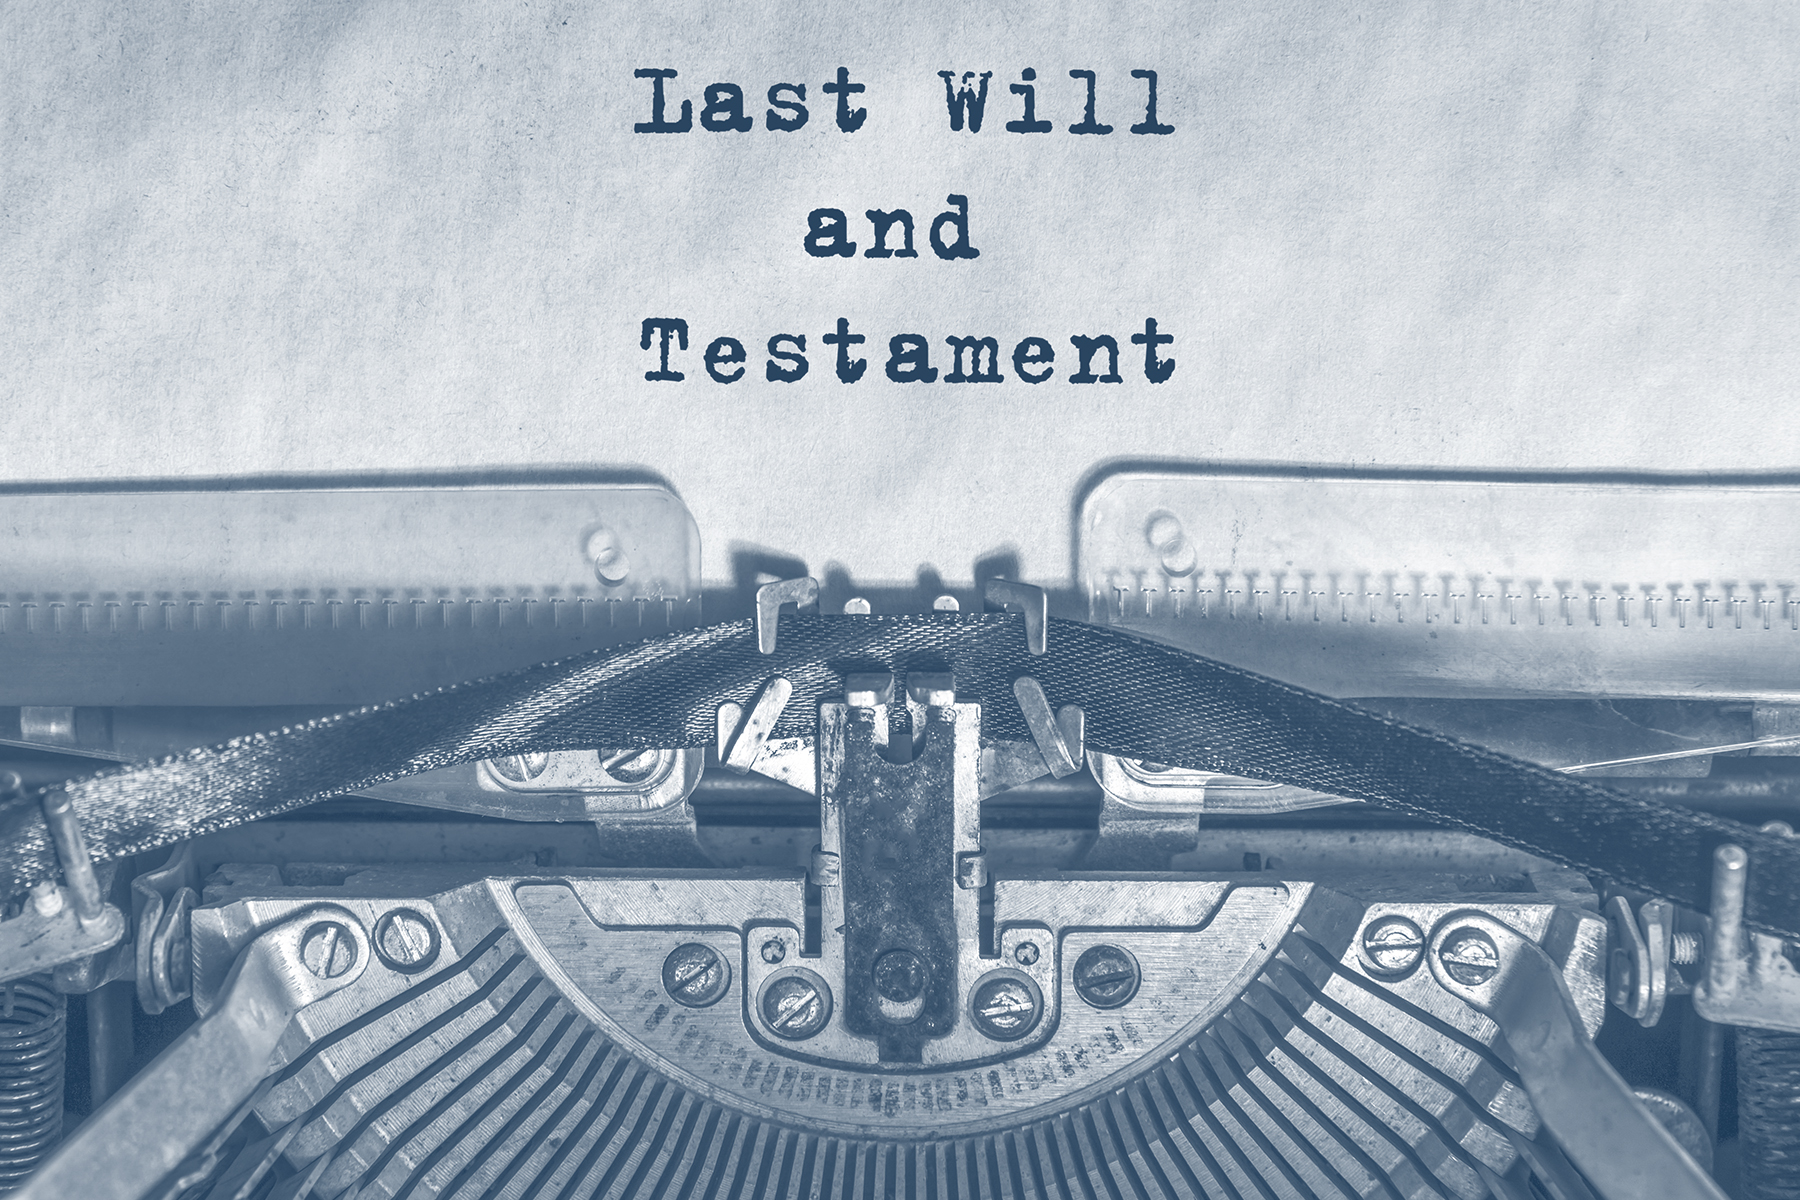 Last Will and Testament,